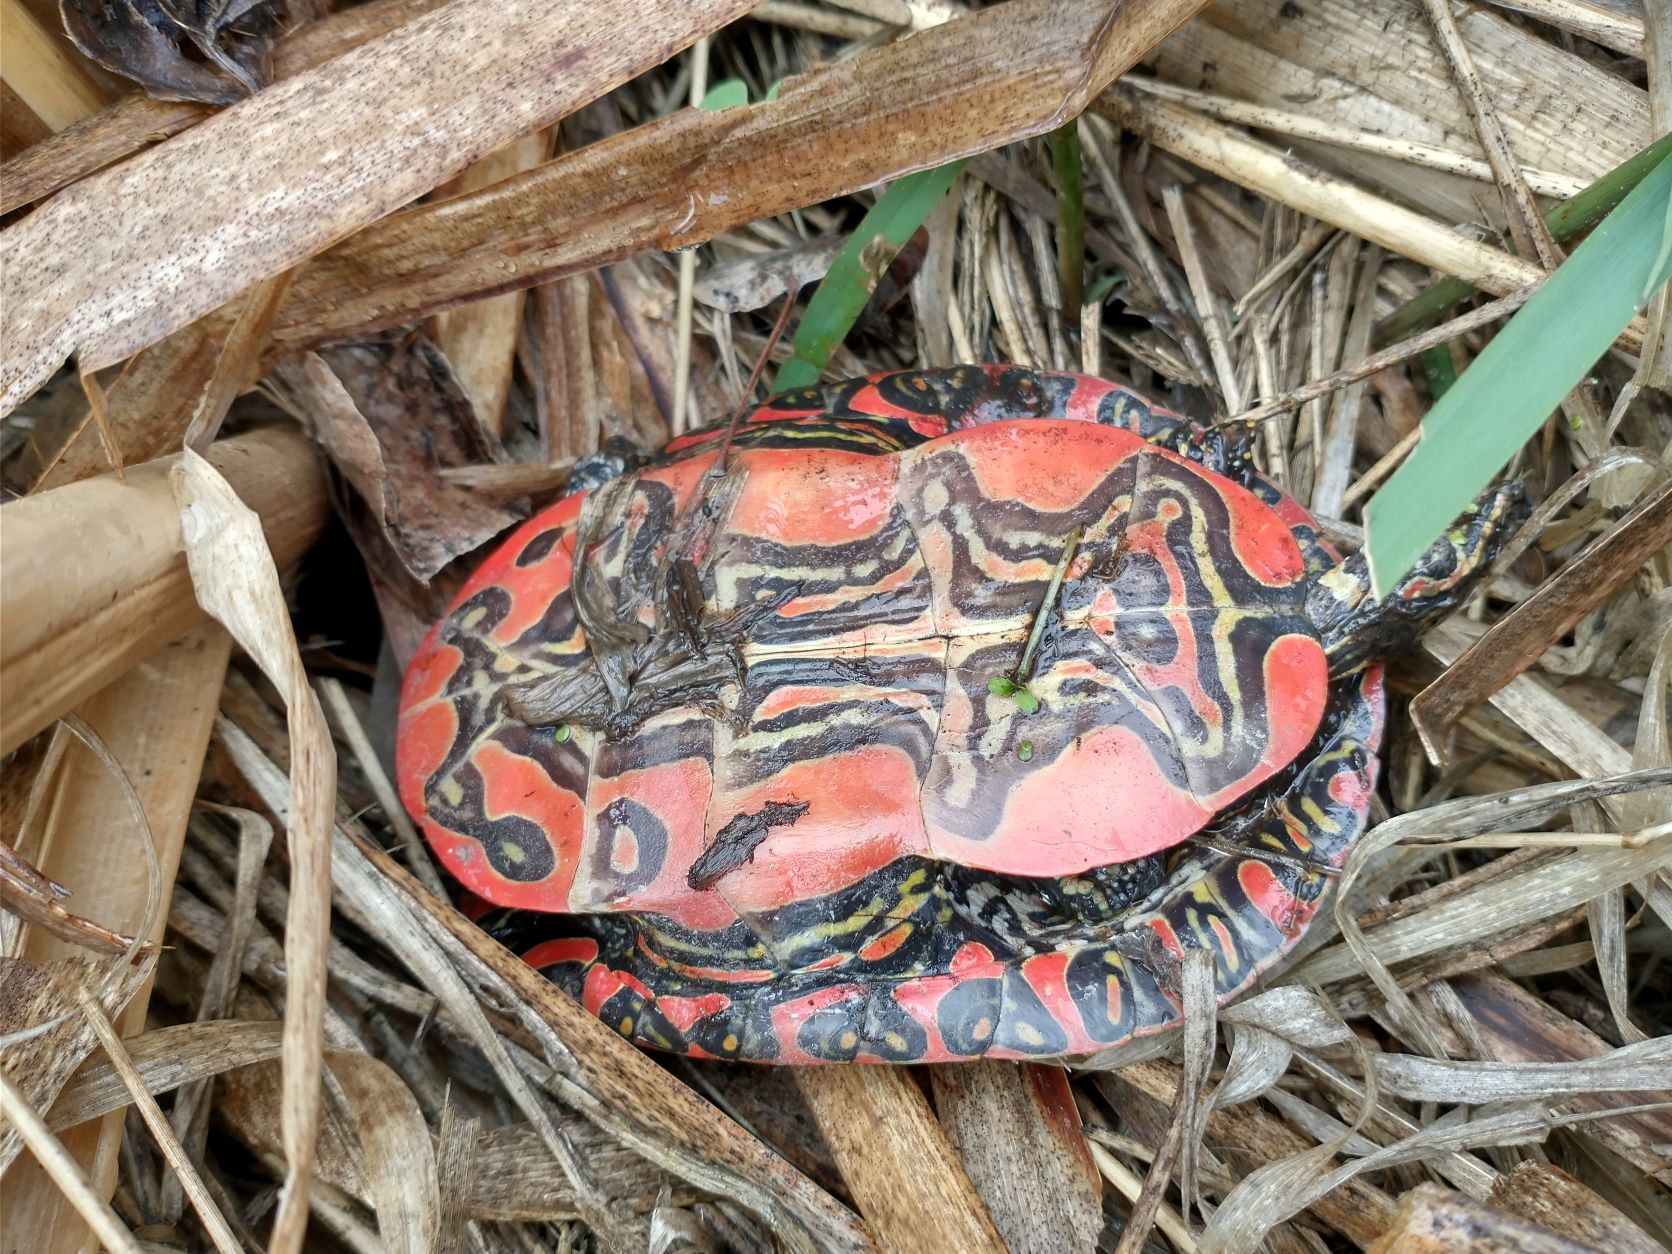 Vibrant red, black, and yellow patterned underside of a painted turtle shell.